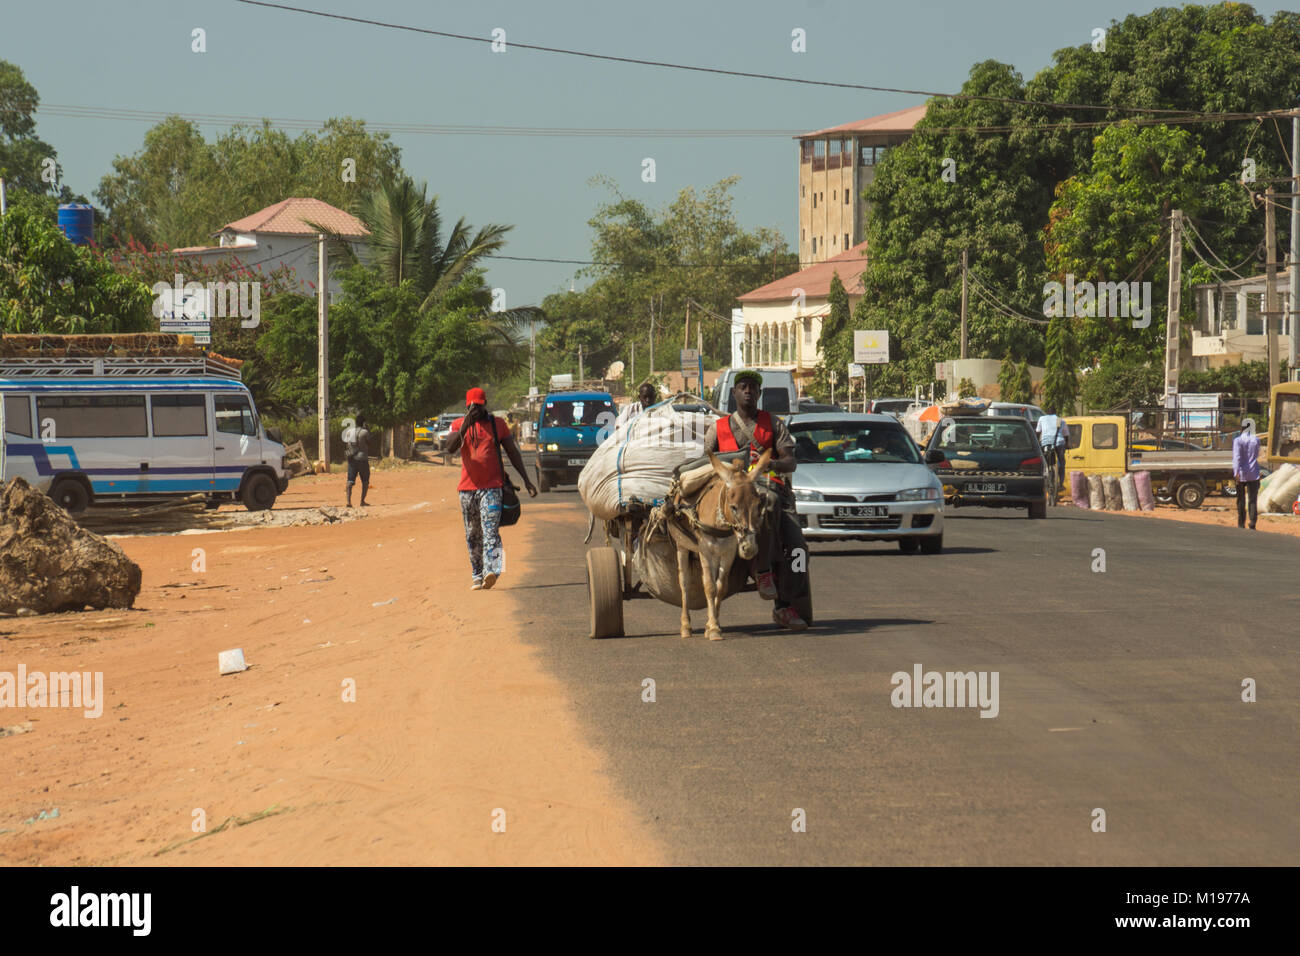 An african male rides a donkey and cart on a street in Senegambia, Gambia, Africa Stock Photo